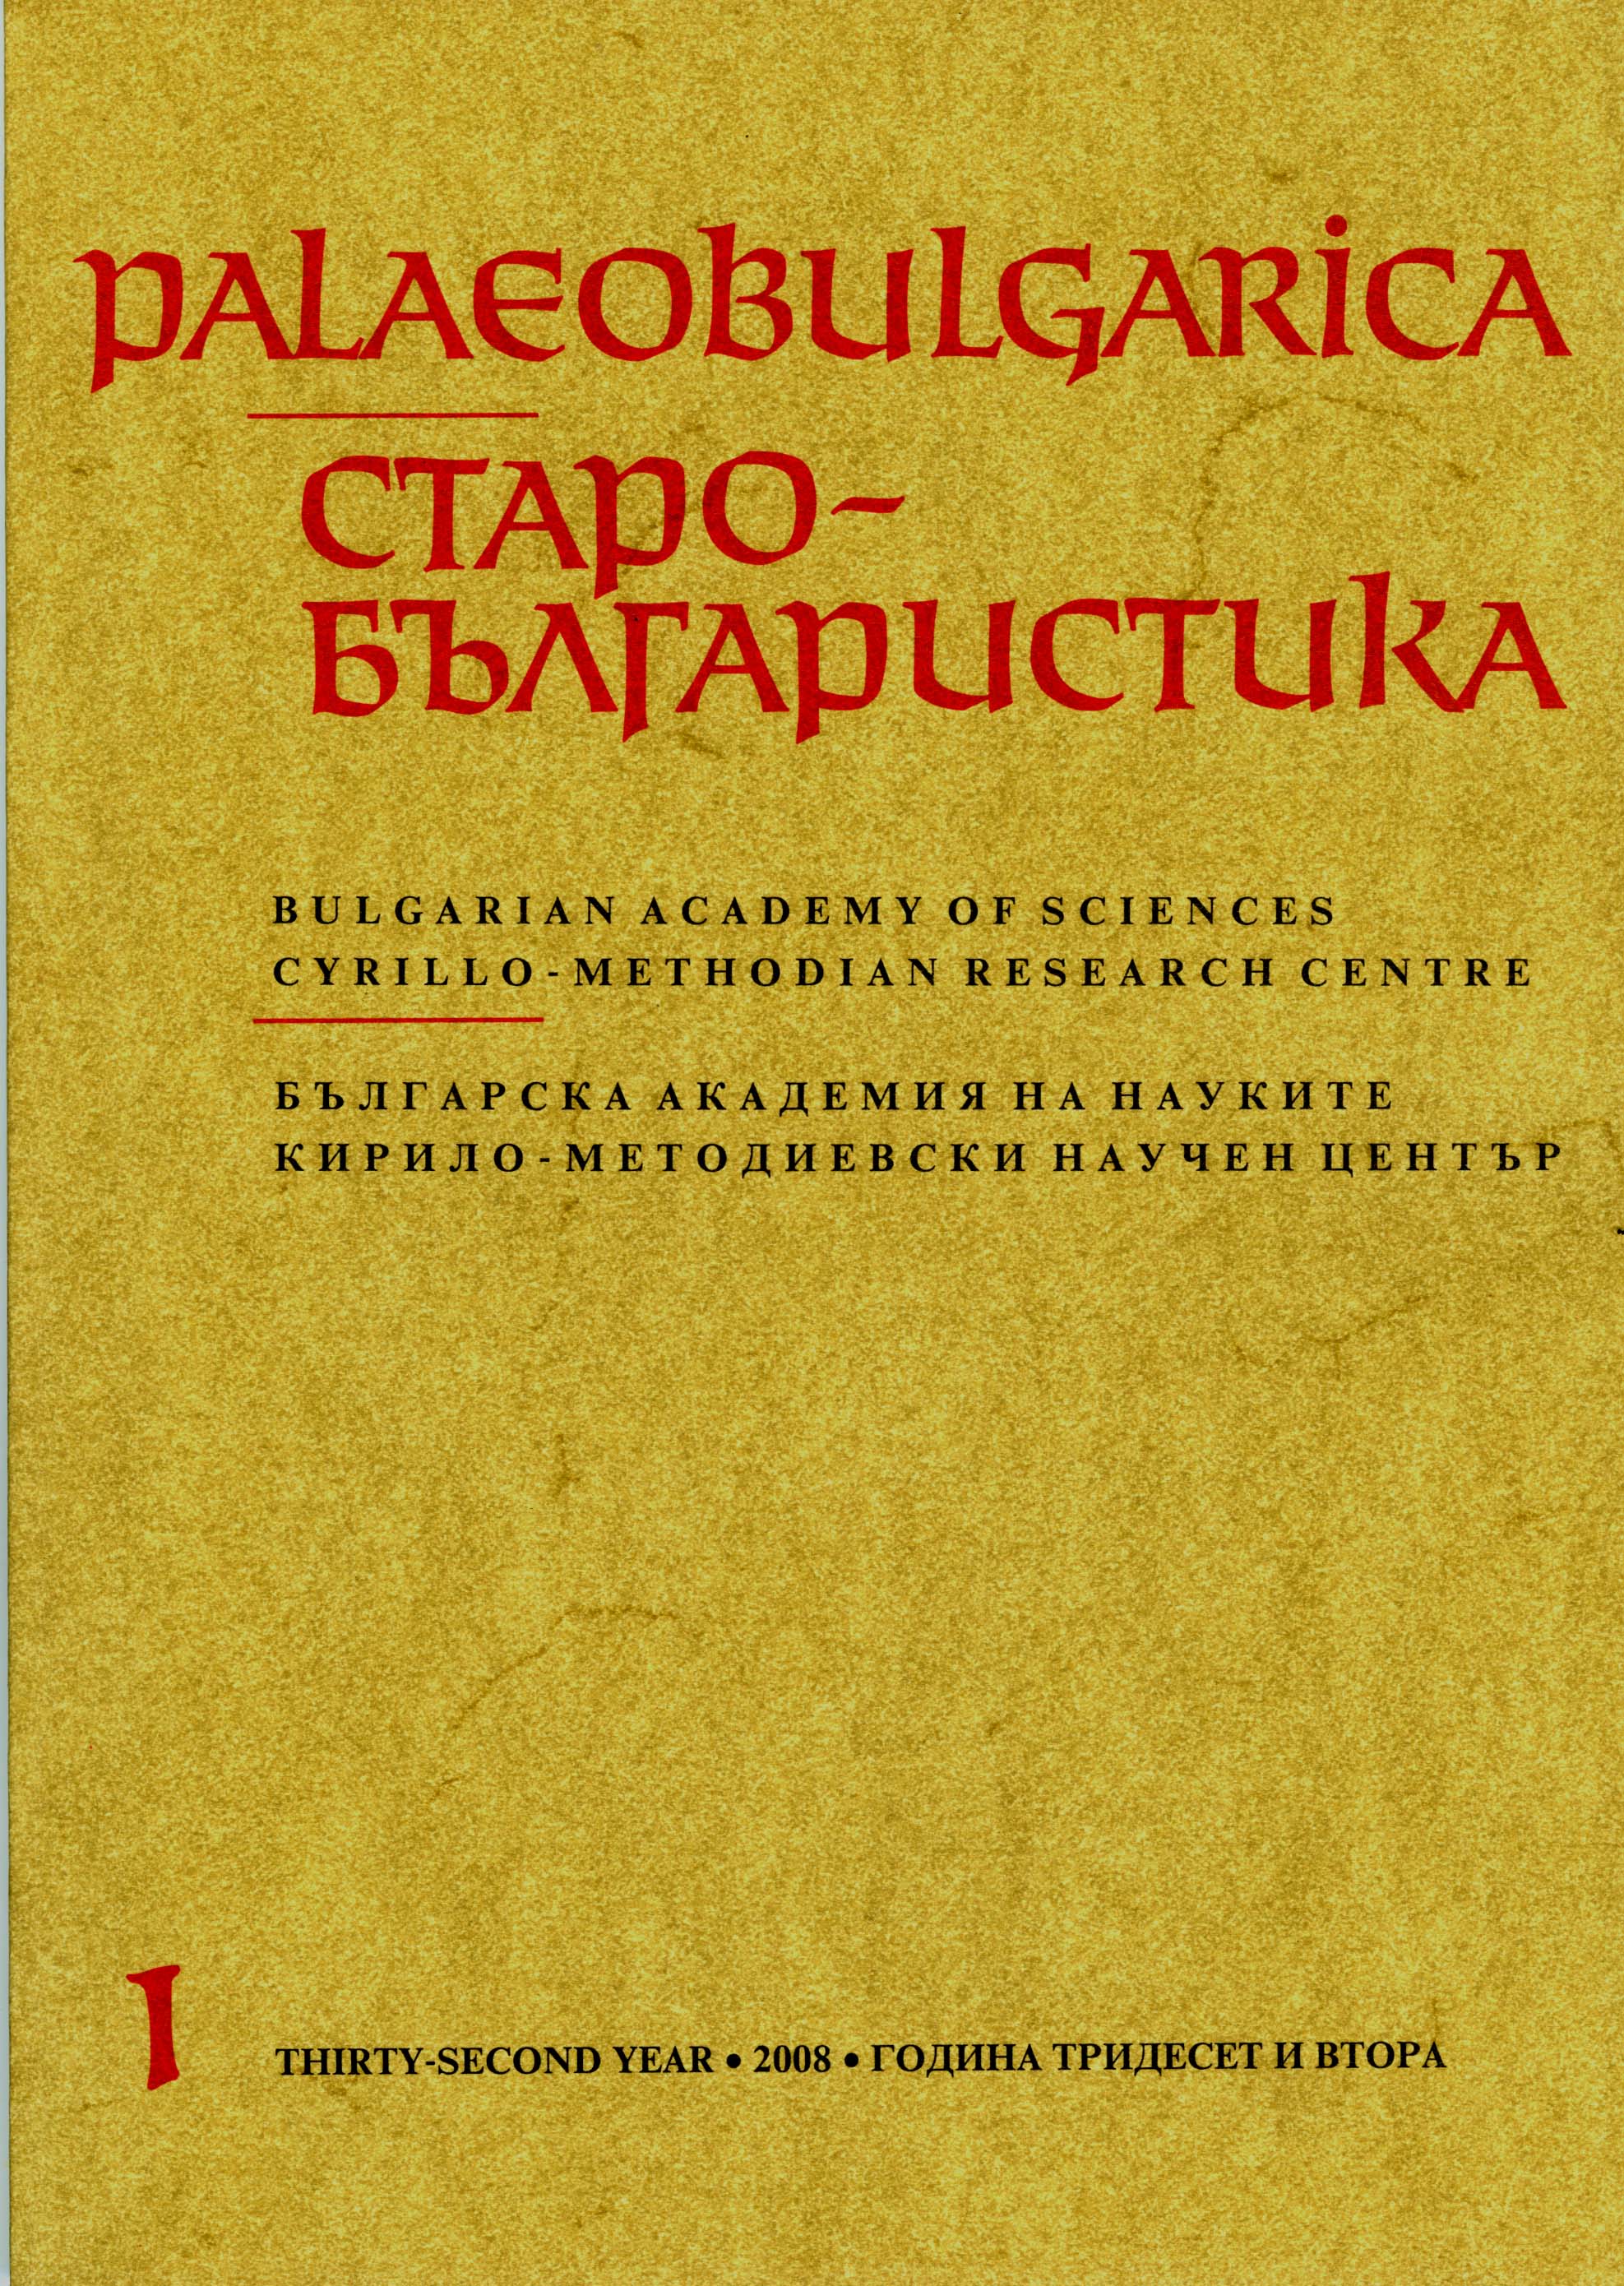 Slavonic Himnography – Its Achievements and Research Problems Cover Image